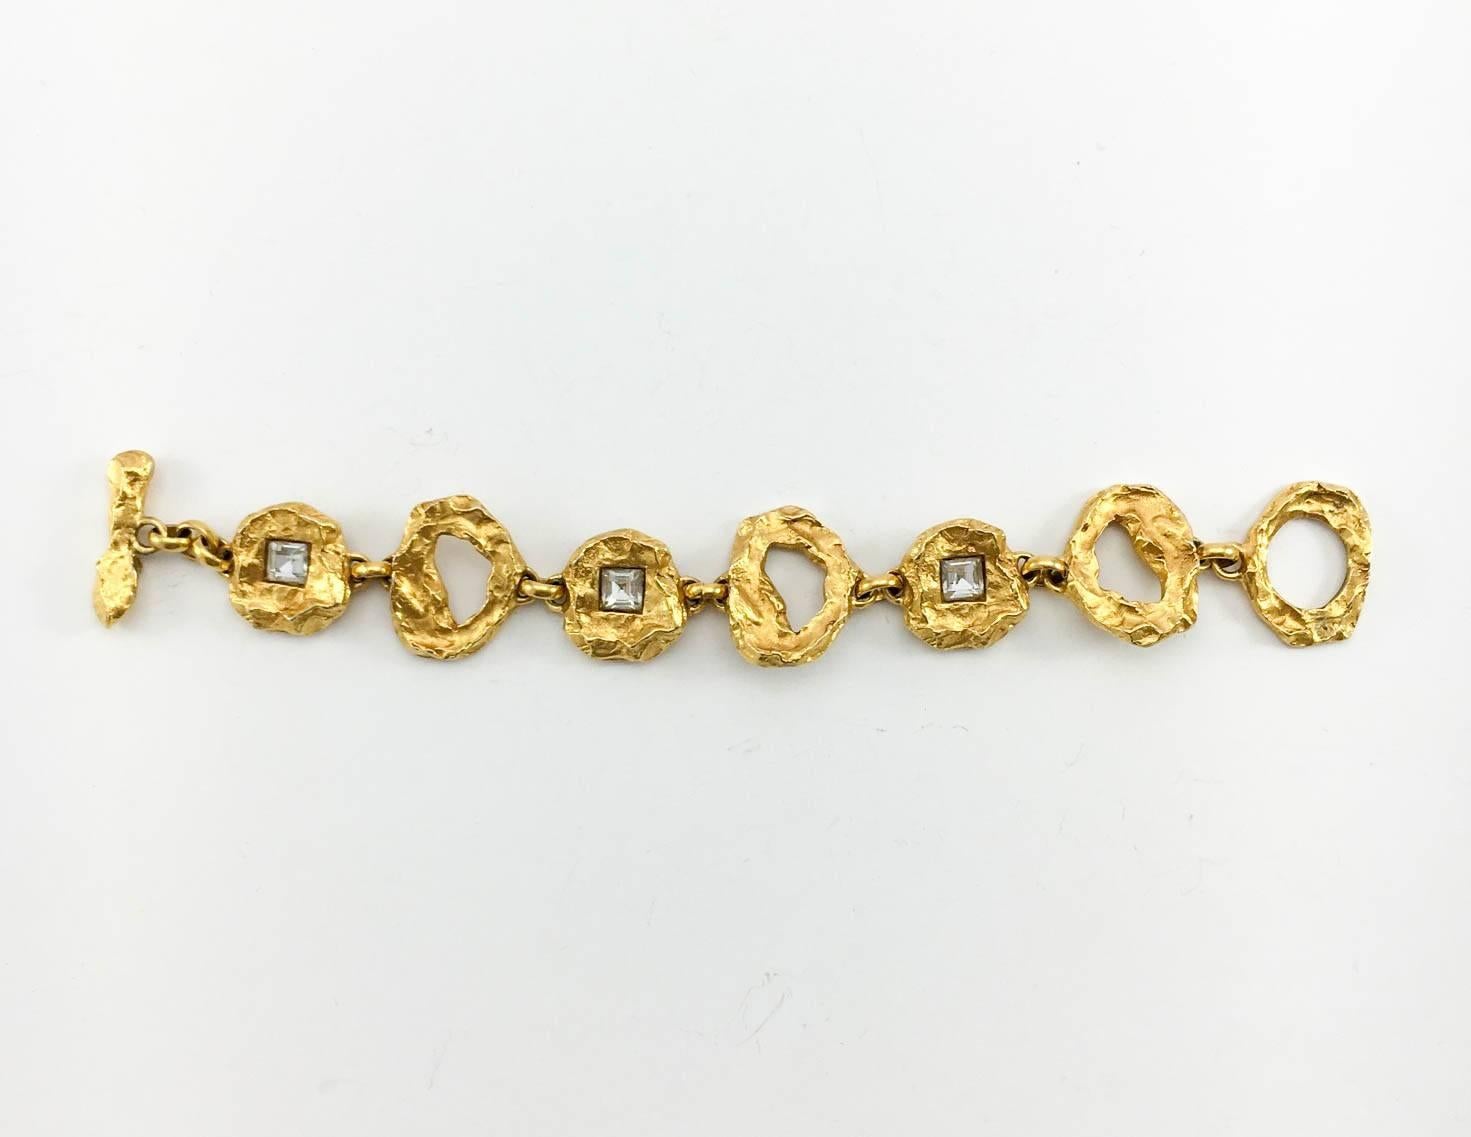 Striking Vintage Lacroix by Goossens Bracelet. This gorgeous Lacroix bracelet by Robert Goossens is gold plated and features Gripoix crystals. The design showcases the mastery of Maison Goossens in making jewellery and giving it an organic look and